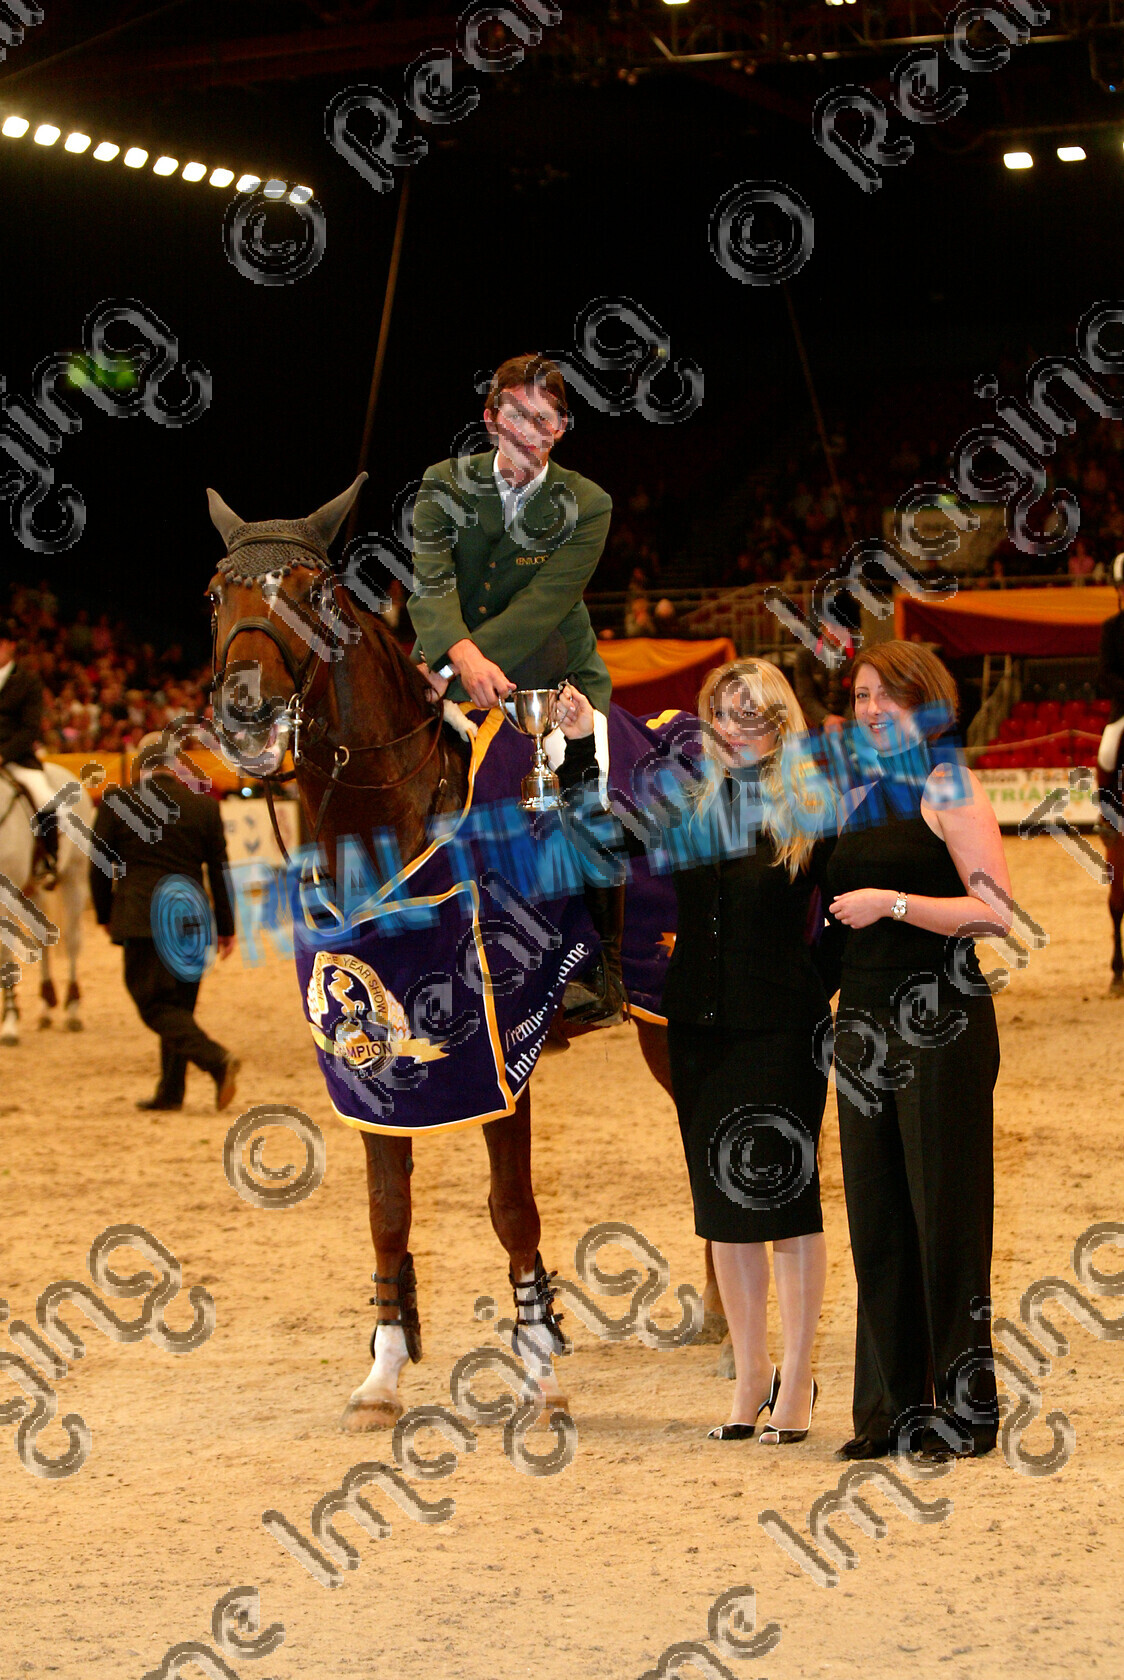 S05-67-T7-054 
 HOYS 2005: The Zinc Management Cup winner 
 Keywords: horse of the year show 2005 05 hoys saturday 15 10 october 21 Zinc Management Cup winner 95 Intermission Billy Twomey chestnut mare standing presentation rug trophy rosette showjumping showjumper